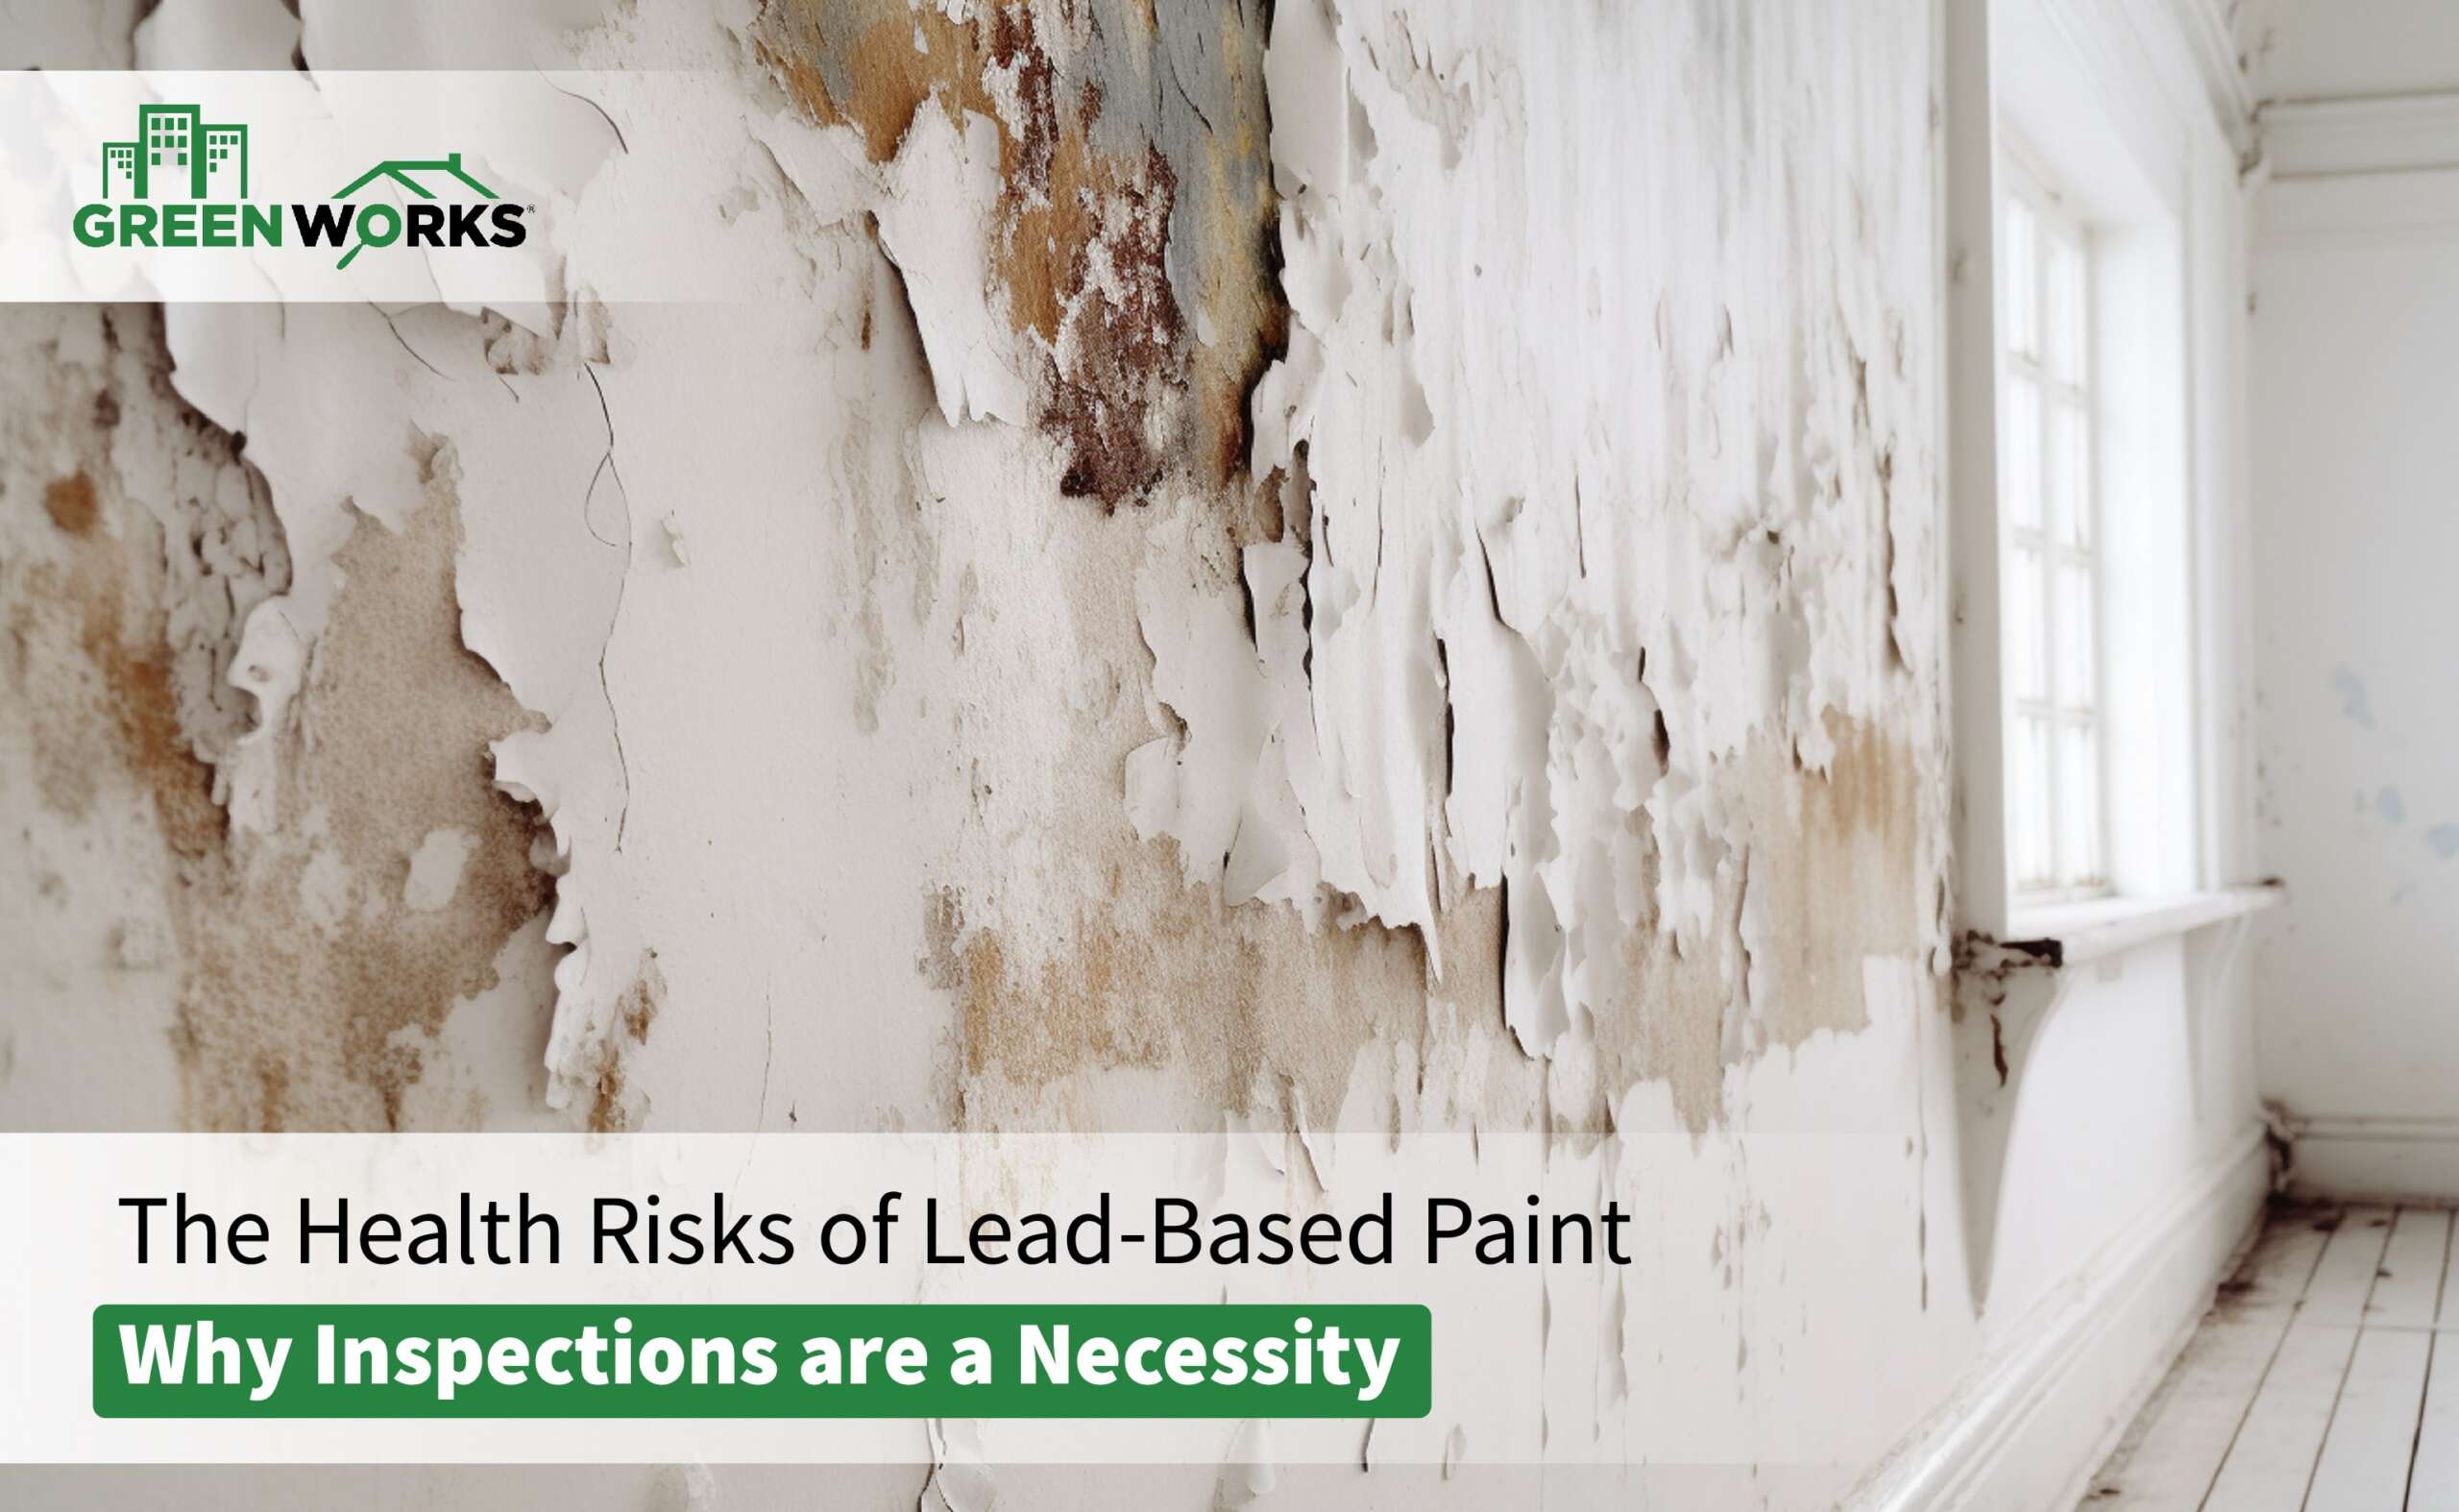 The Health Risks of Lead-Based Paint: Why Inspections are a Necessity